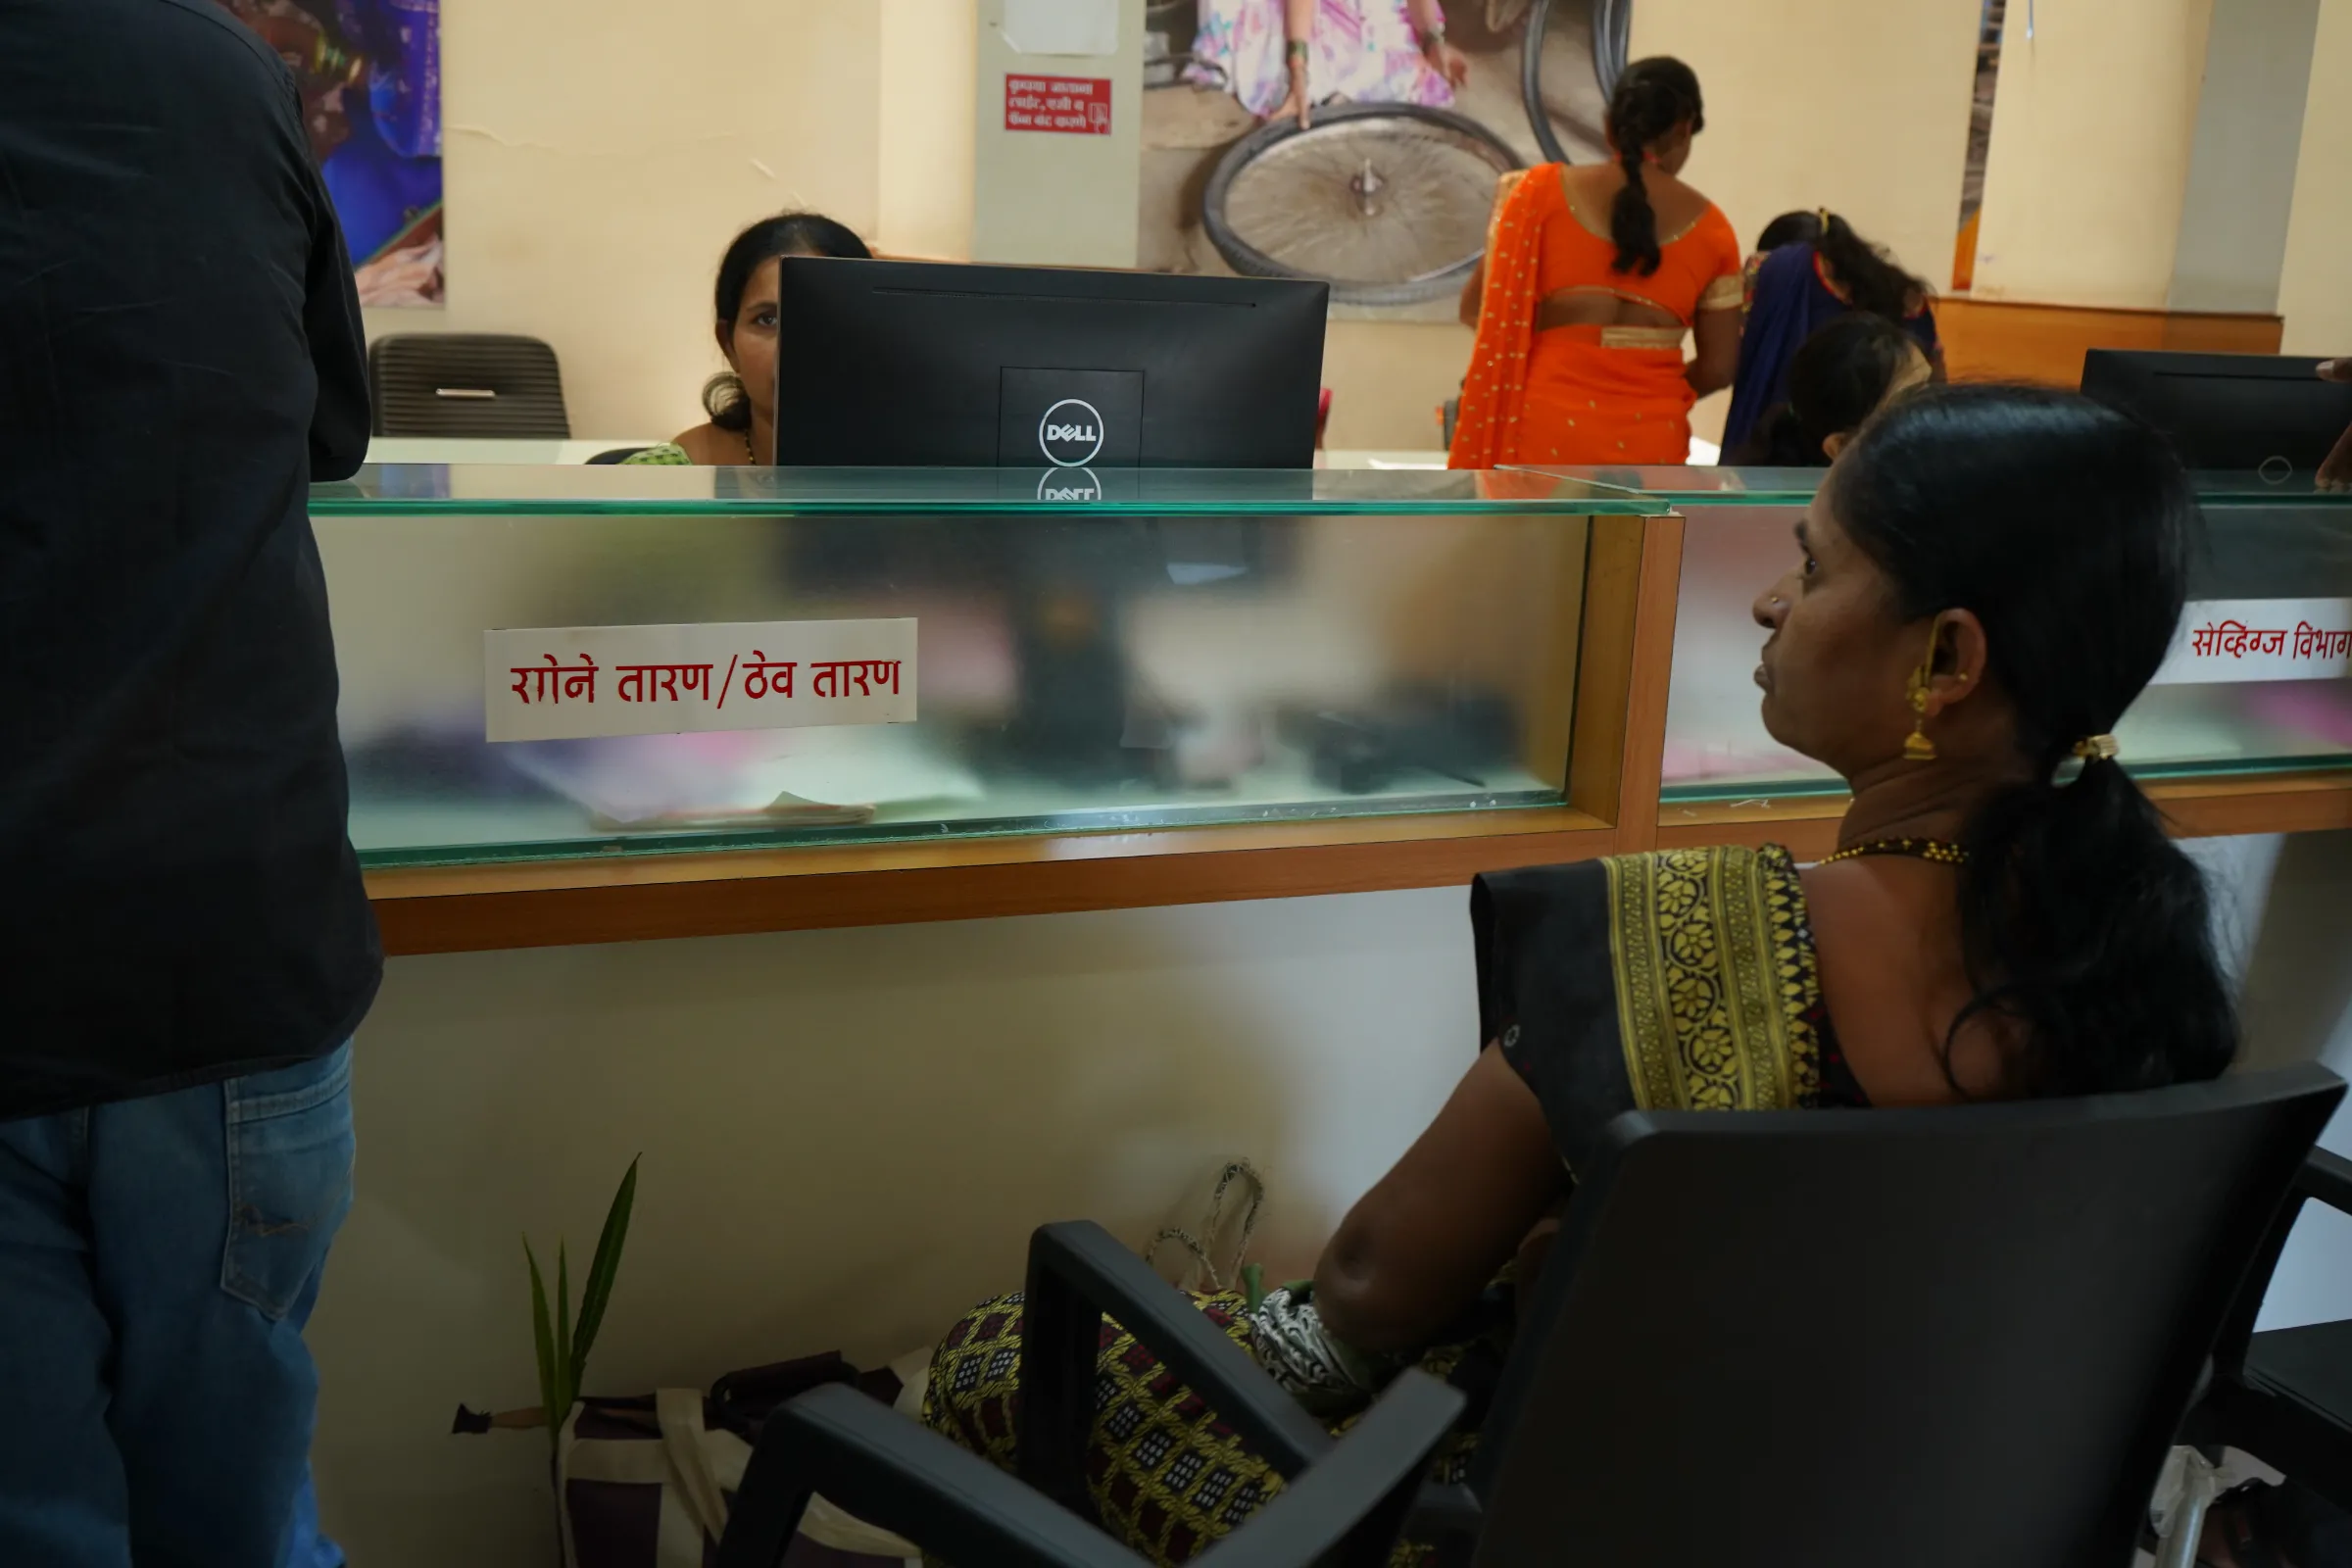 A woman sits on a bank counter that has a sticker with “gold mortgage” written on it in Marathi at Mann Deshi bank in Mhaswad village of Satara district, India, September 14, 2022